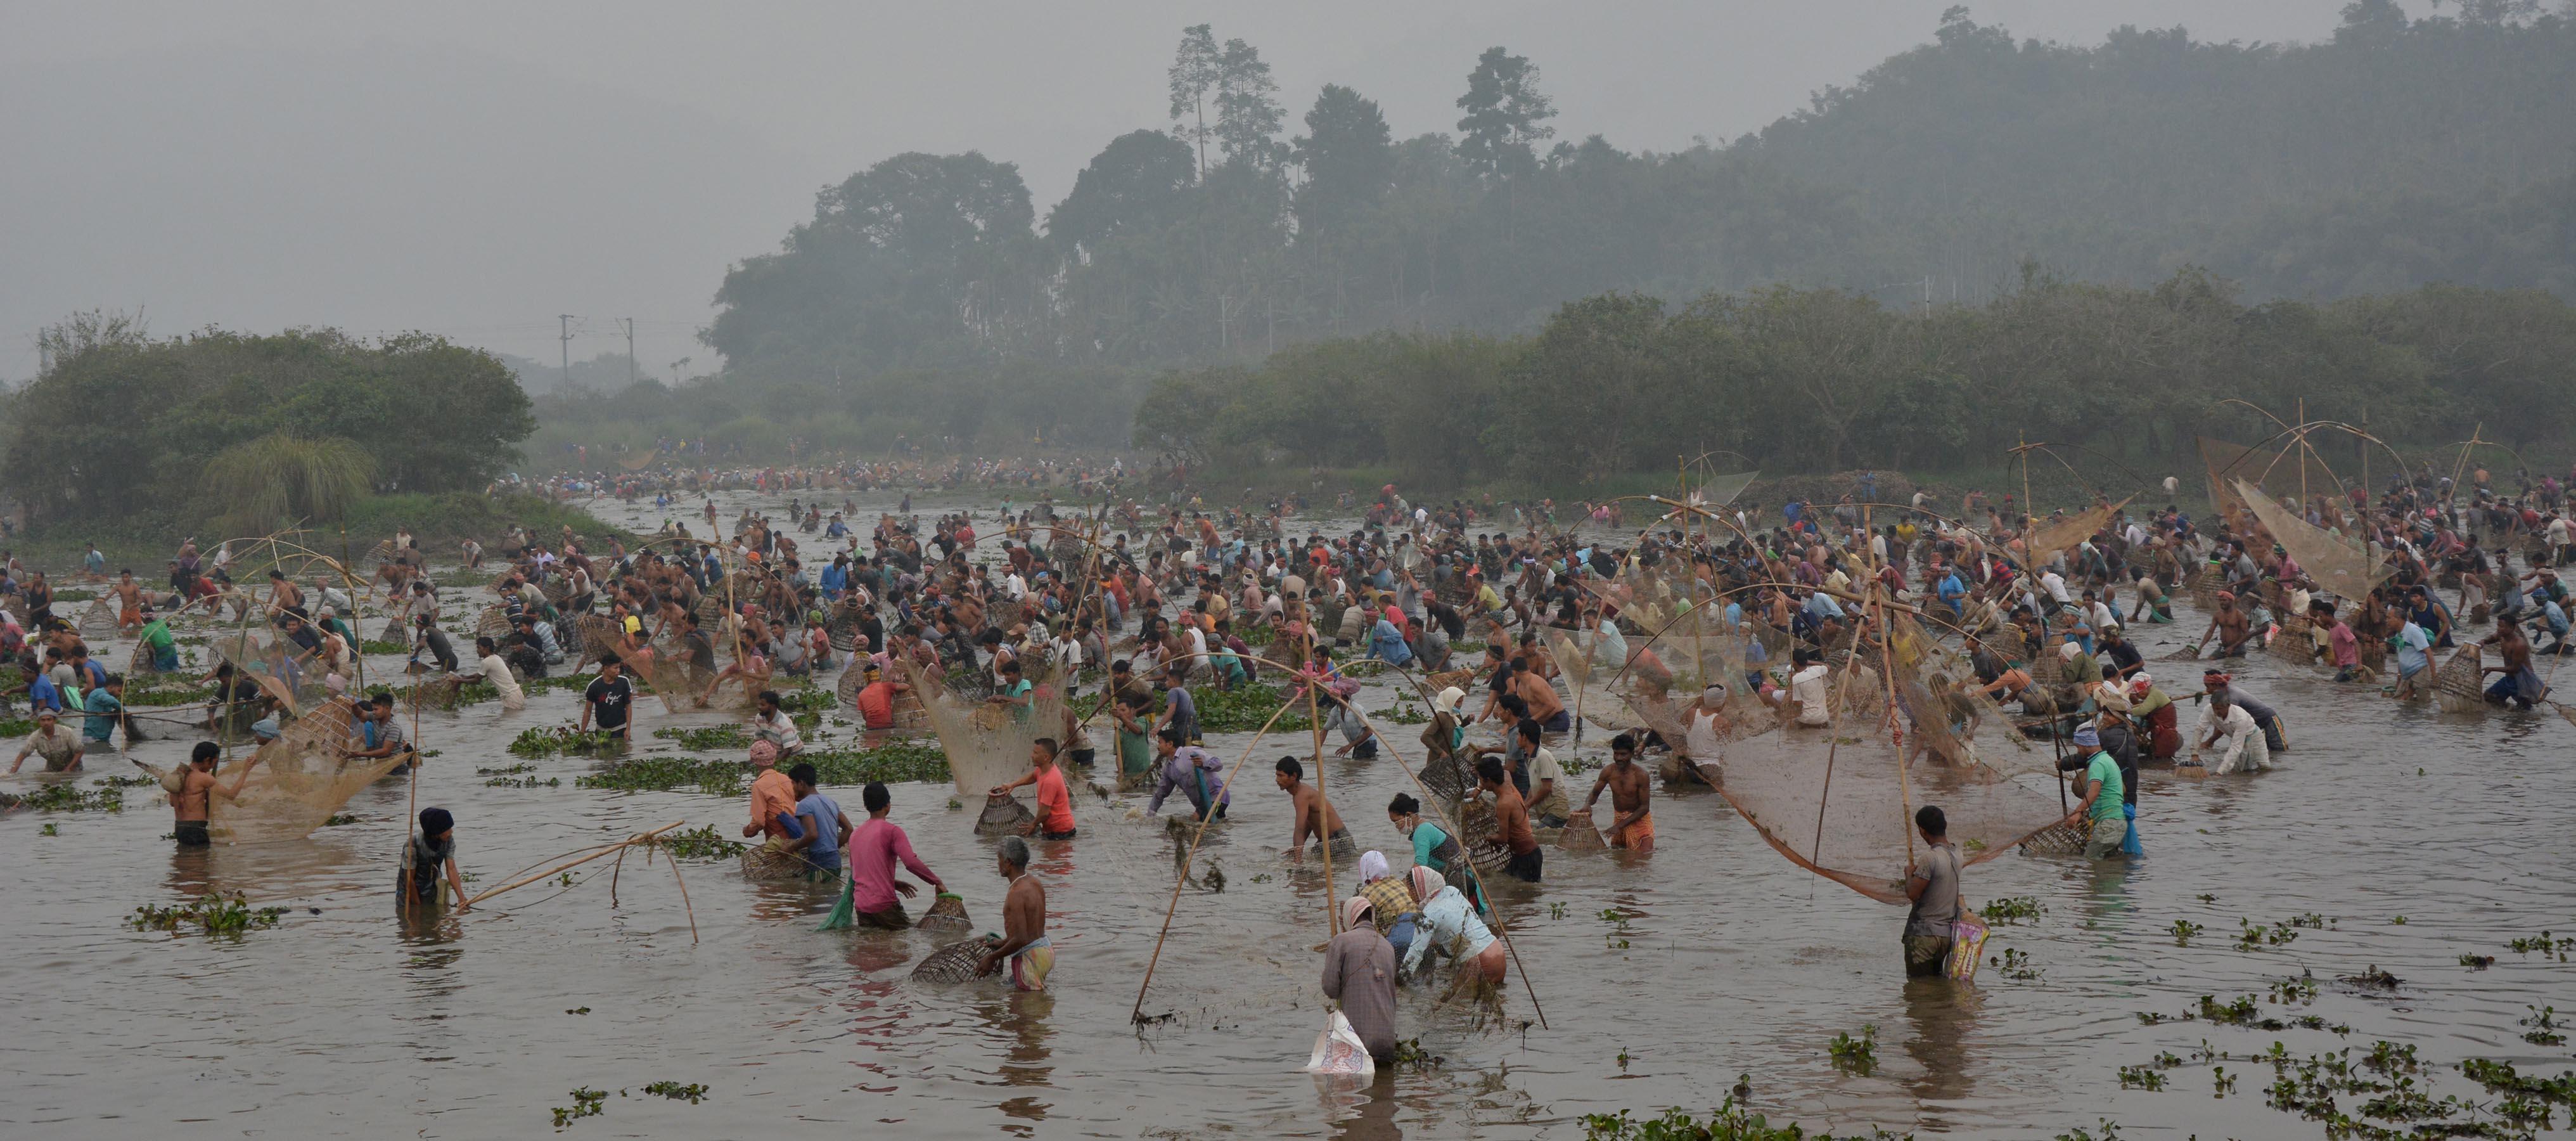 Villagers participate in community fishing during the Bhogali Bihu celebration at Goroimari Lake in Panbari village, some 50 kilometers (31 miles) in Guwahati, India, Jan. 13, 2021. “Bhogali Bihu” is a harvest festival celebrated in Assam which marks the end of the harvesting season. The celebrations include community feast and prayers to the Fire God not to unleash its wrath during the summers. Pix by ub photos